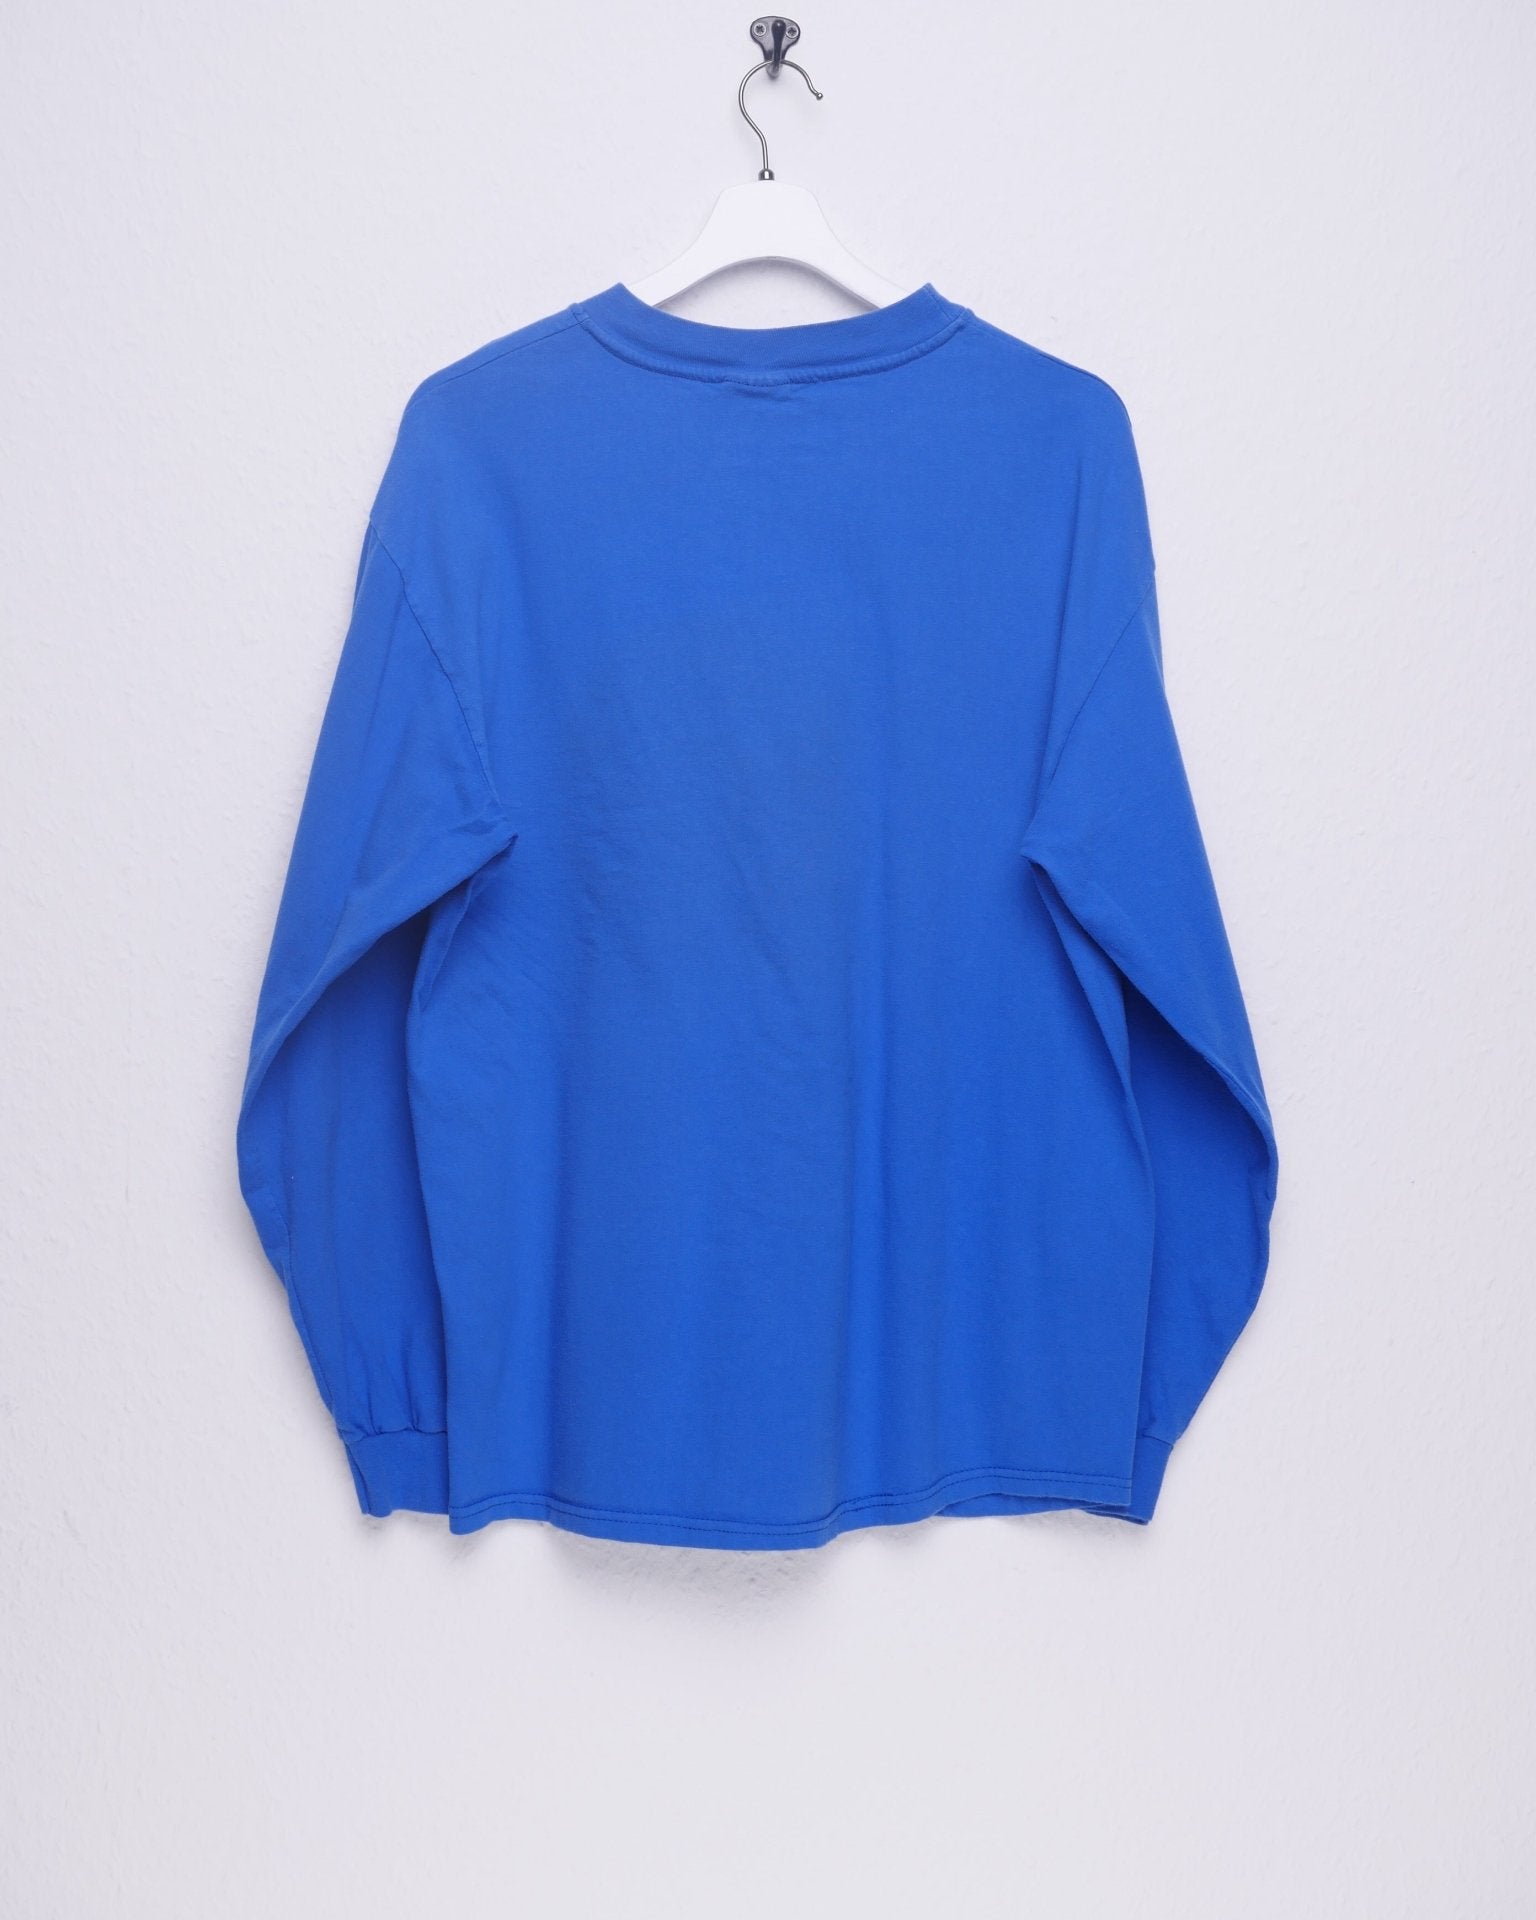 printed Spellout blue L/S Shirt - Peeces